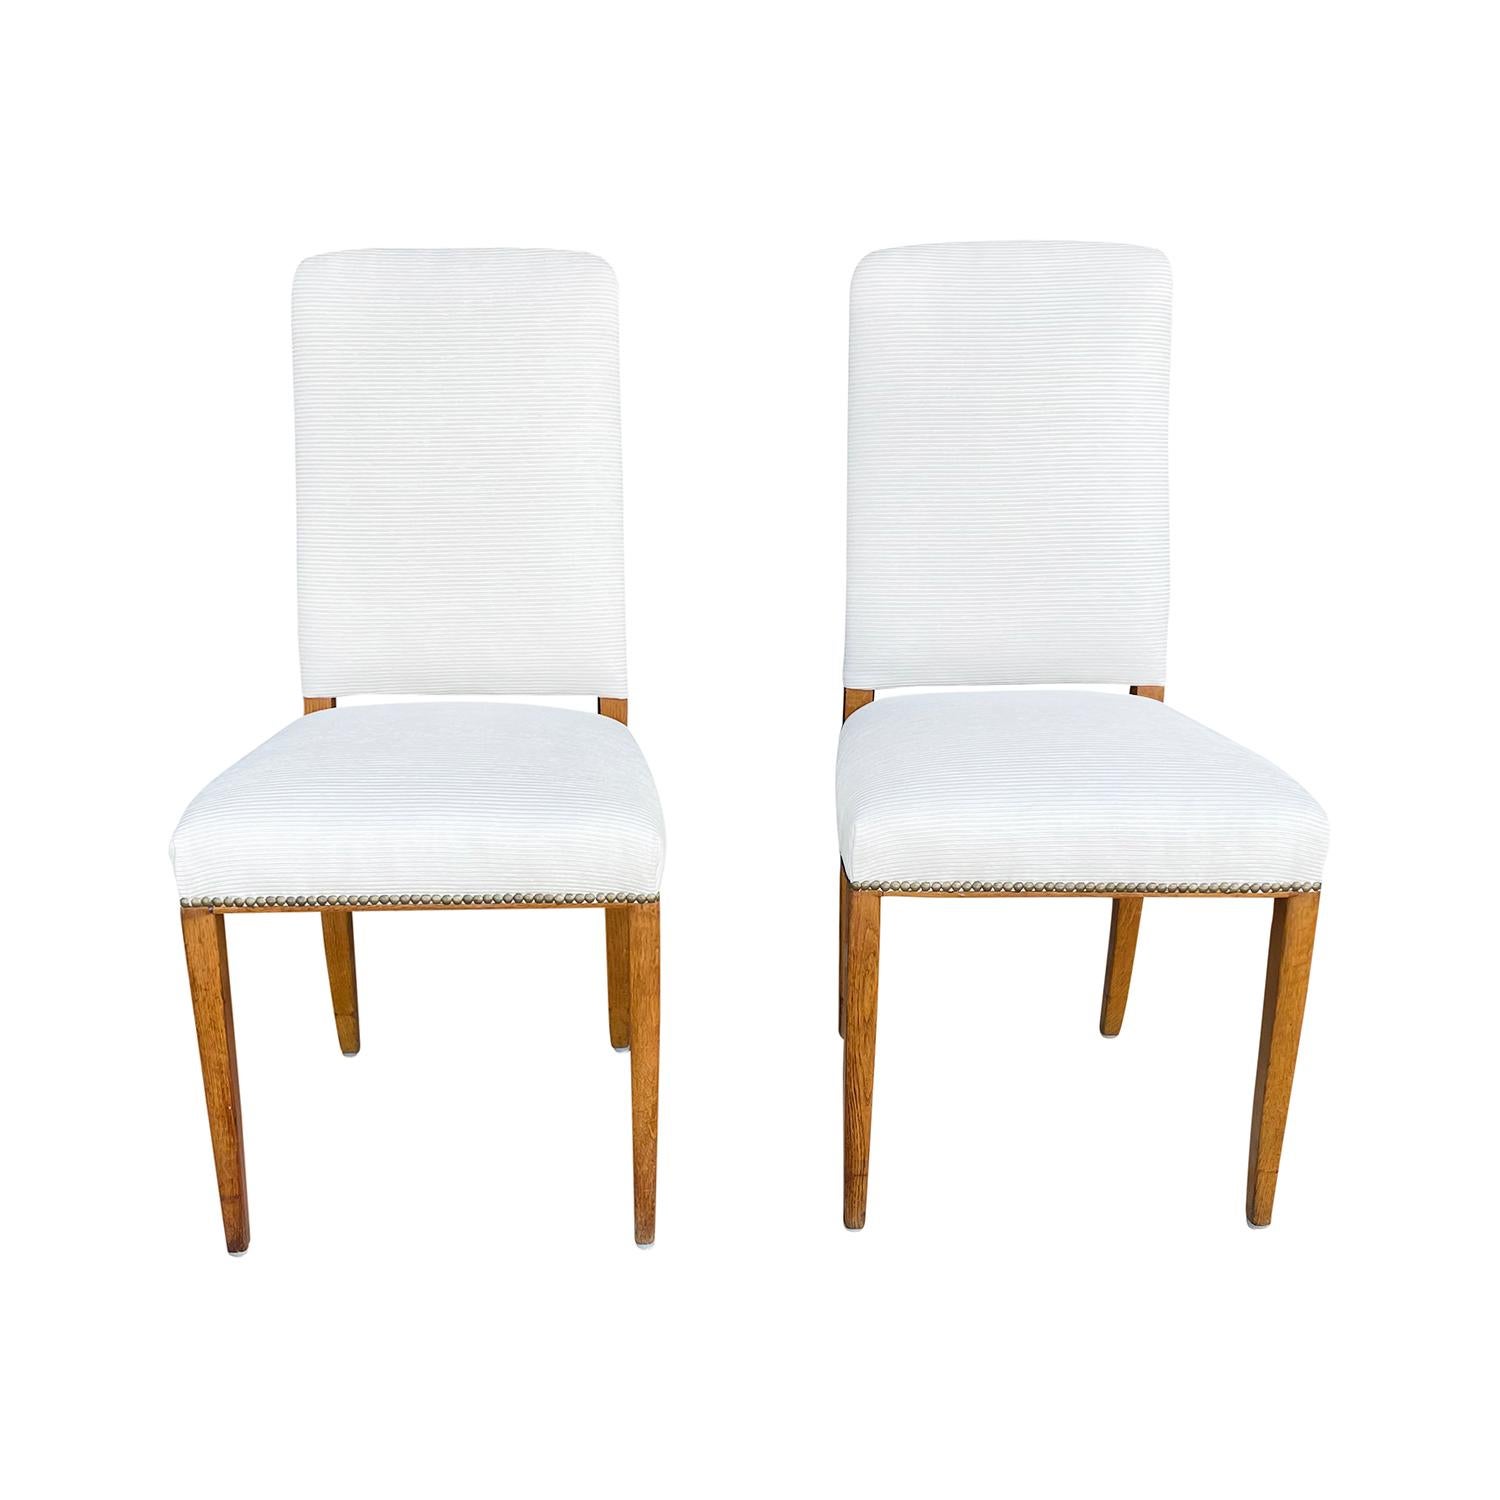 A vintage Mid-Century Modern Swedish pair of dining chairs made of hand crafted Birchwood, designed by Carl Malmsten and produced by Möbel Komponerad AV in good condition. The Scandinavian side, corner chairs are enhanced by detailed brass